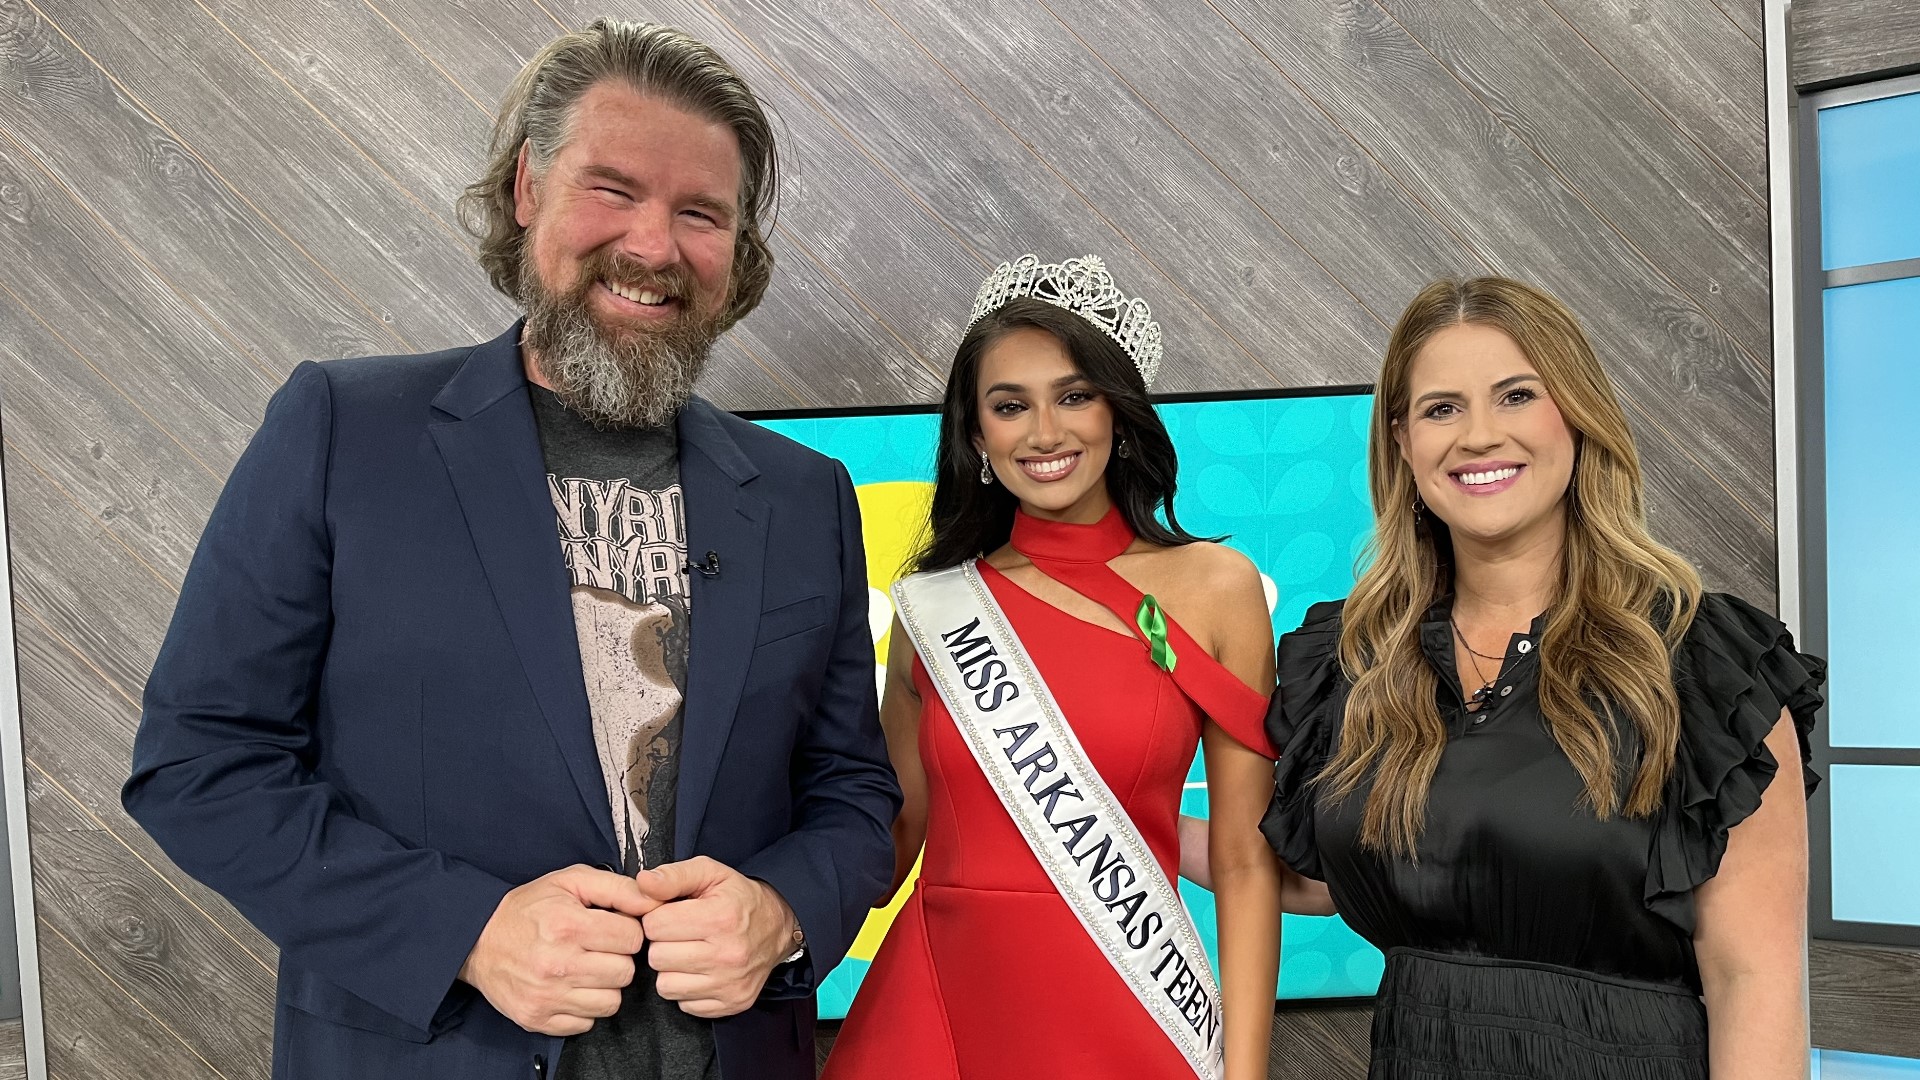 As Miss Arkansas Teen USA, Siyona Karkera wants to use her platform to talk about mental health for kids. She hopes to visits schools and share the best strategies.